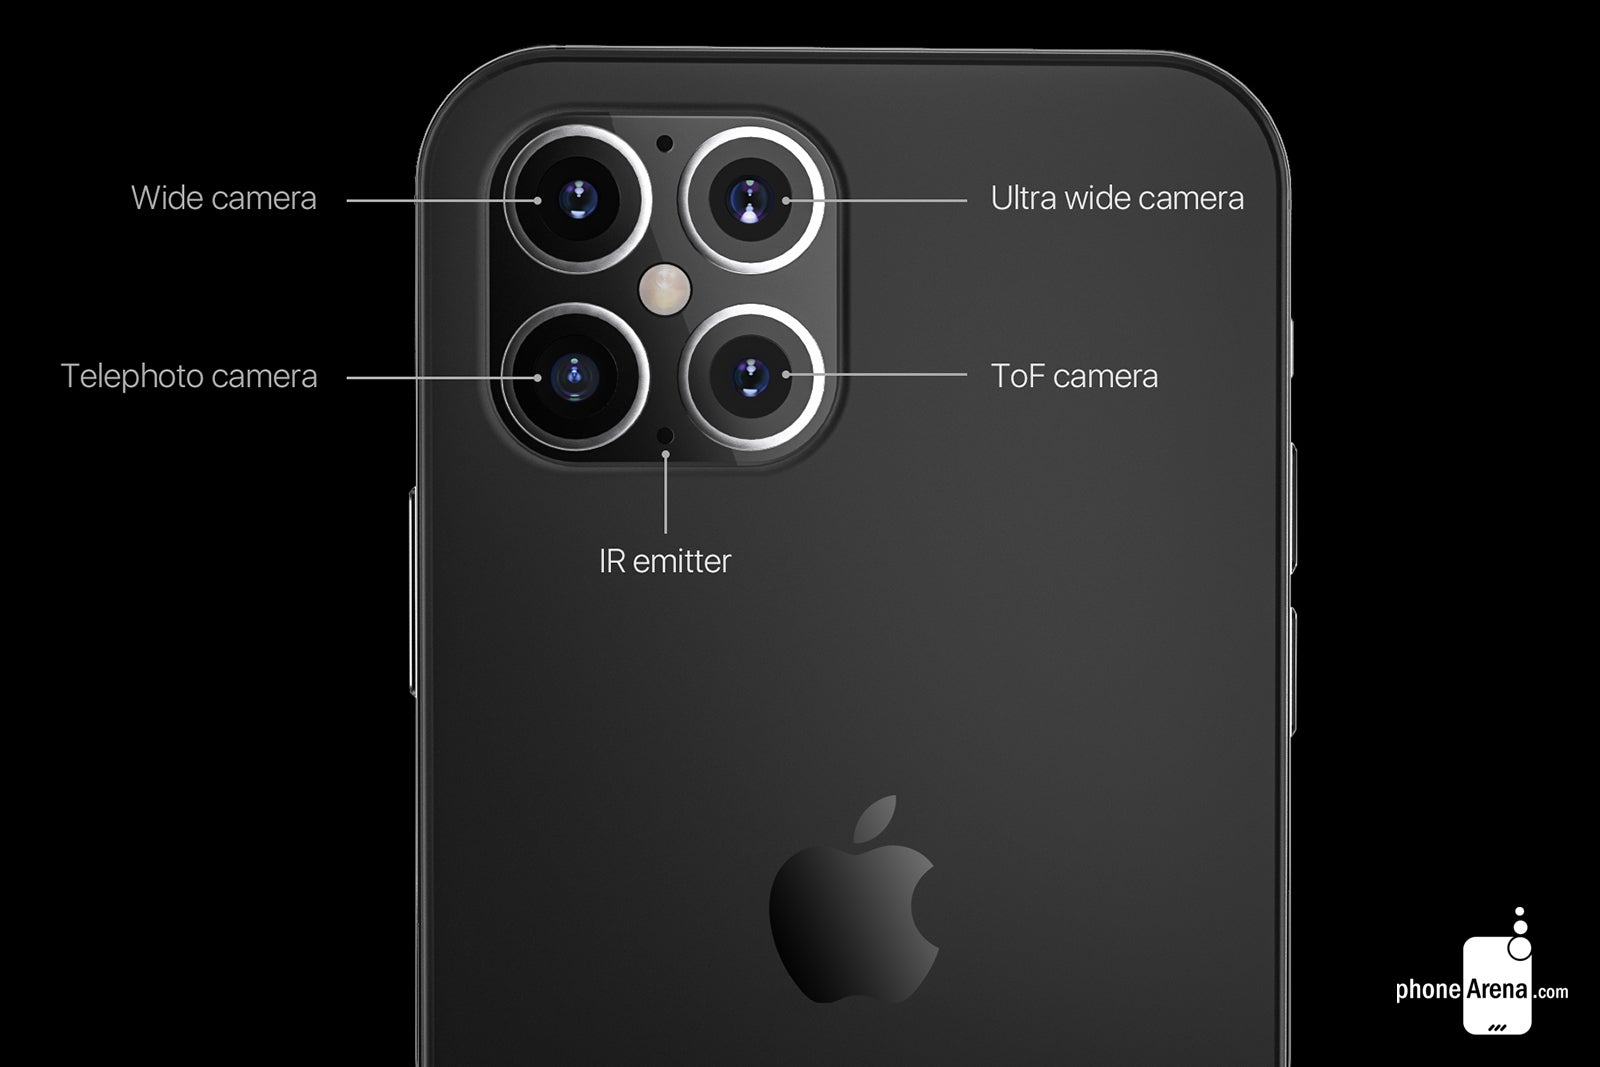 Render of the iPhone 12 Pro Max shows what the quad-camera setup might look like - Analyst explains why he sees no delay for the 5G Apple iPhone launch this fall